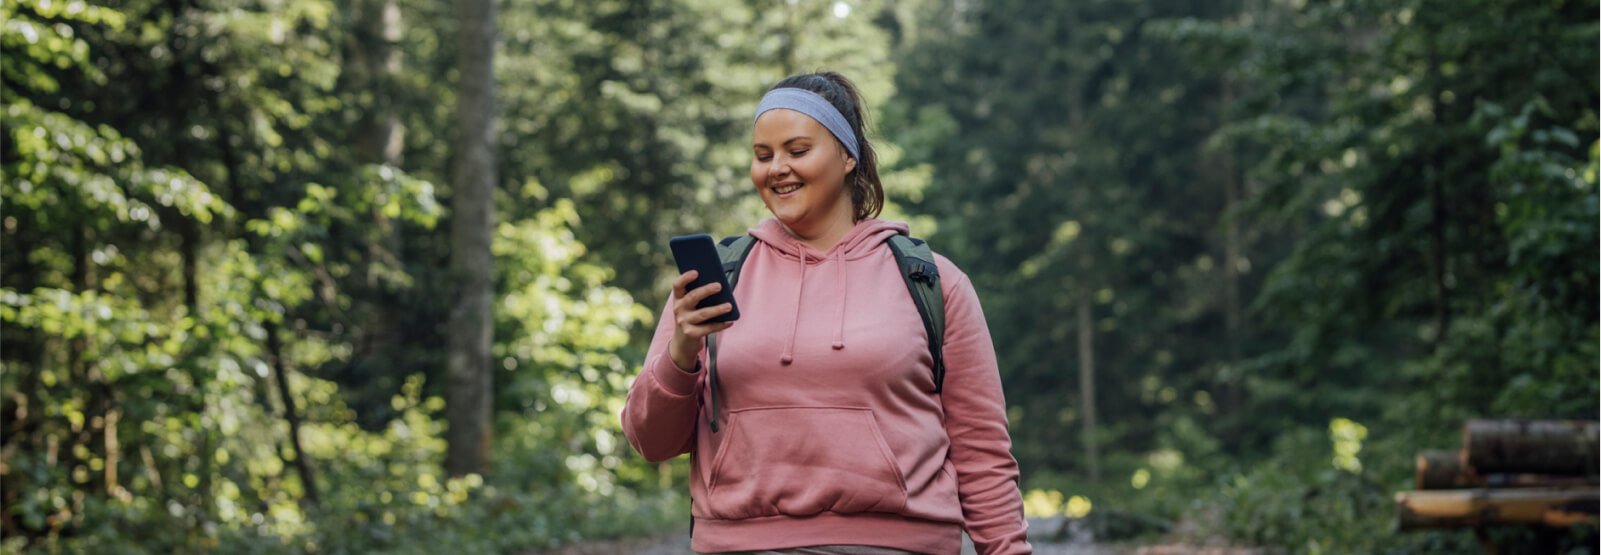 Woman holding a smartphone in a wooded area